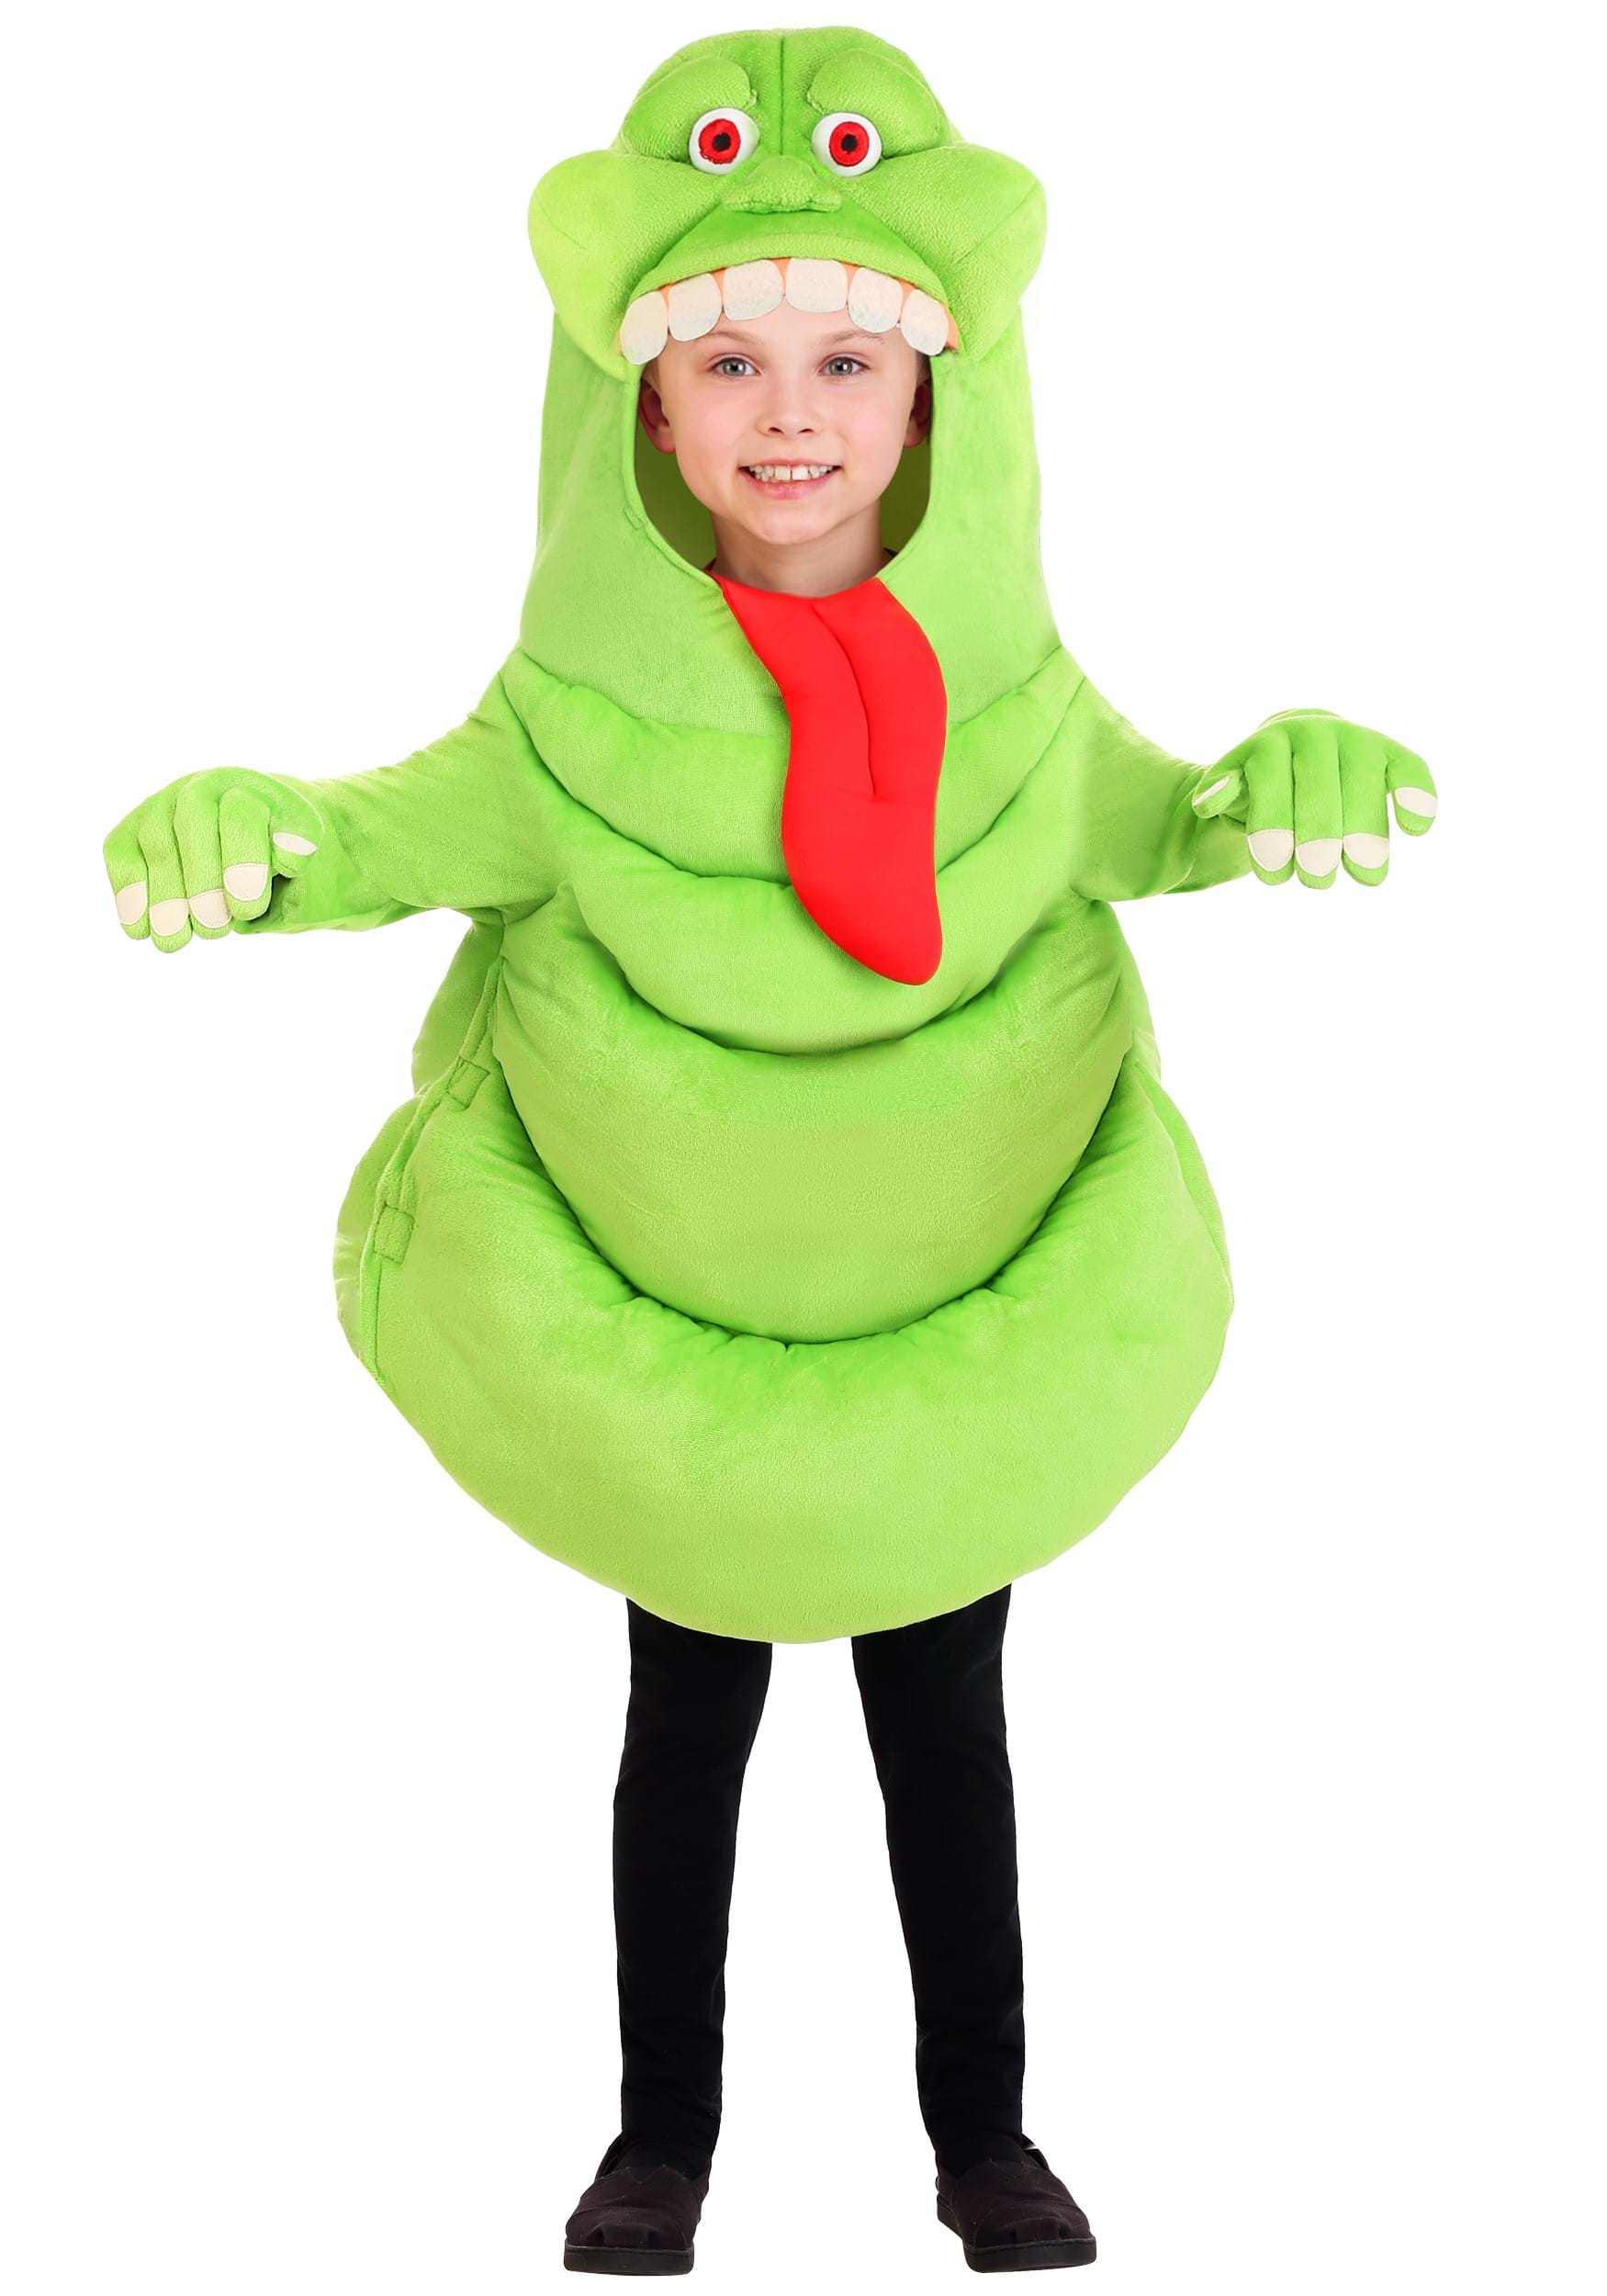 Photos - Fancy Dress Ghostbusters FUN Costumes Kid's  Slimer Costume Tunic With Gloves Green/ 